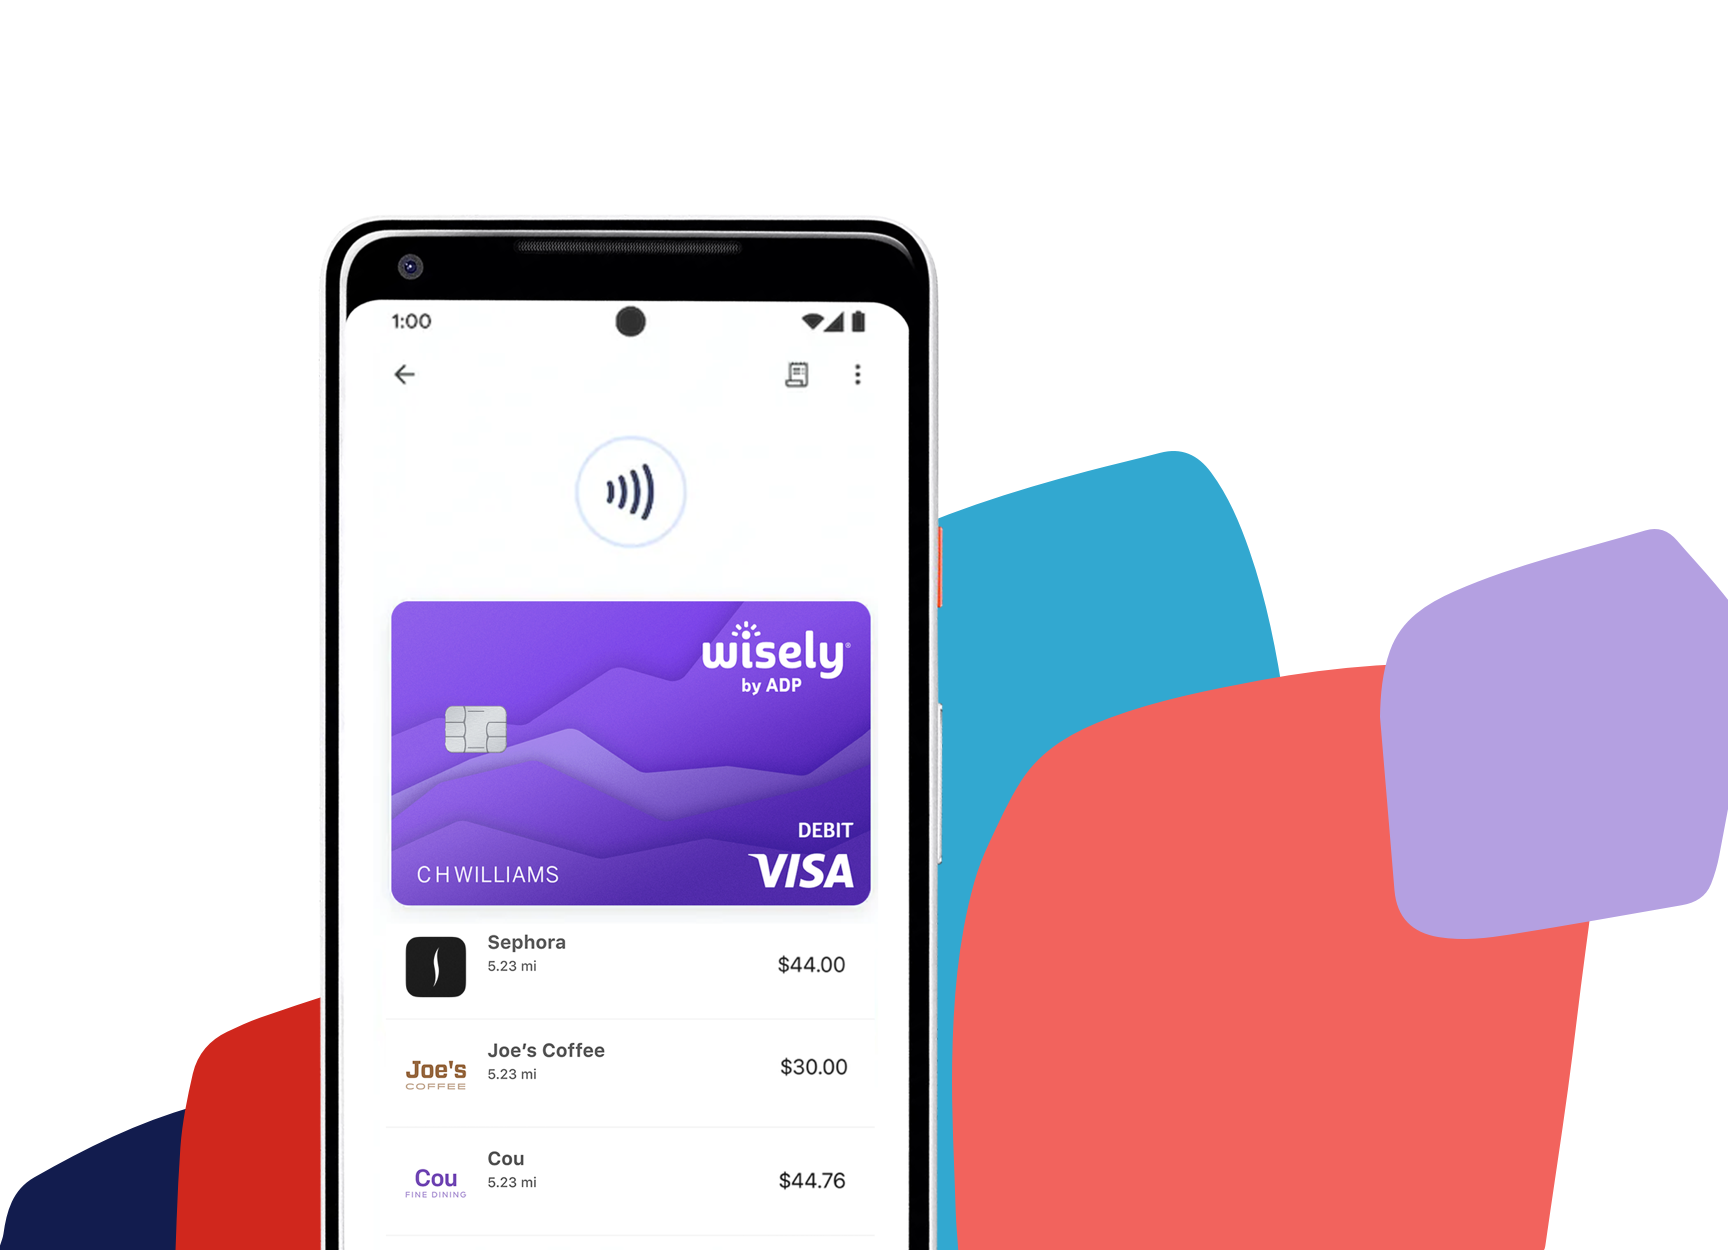 Phone screen shows Wisely card linked to Google Pay.